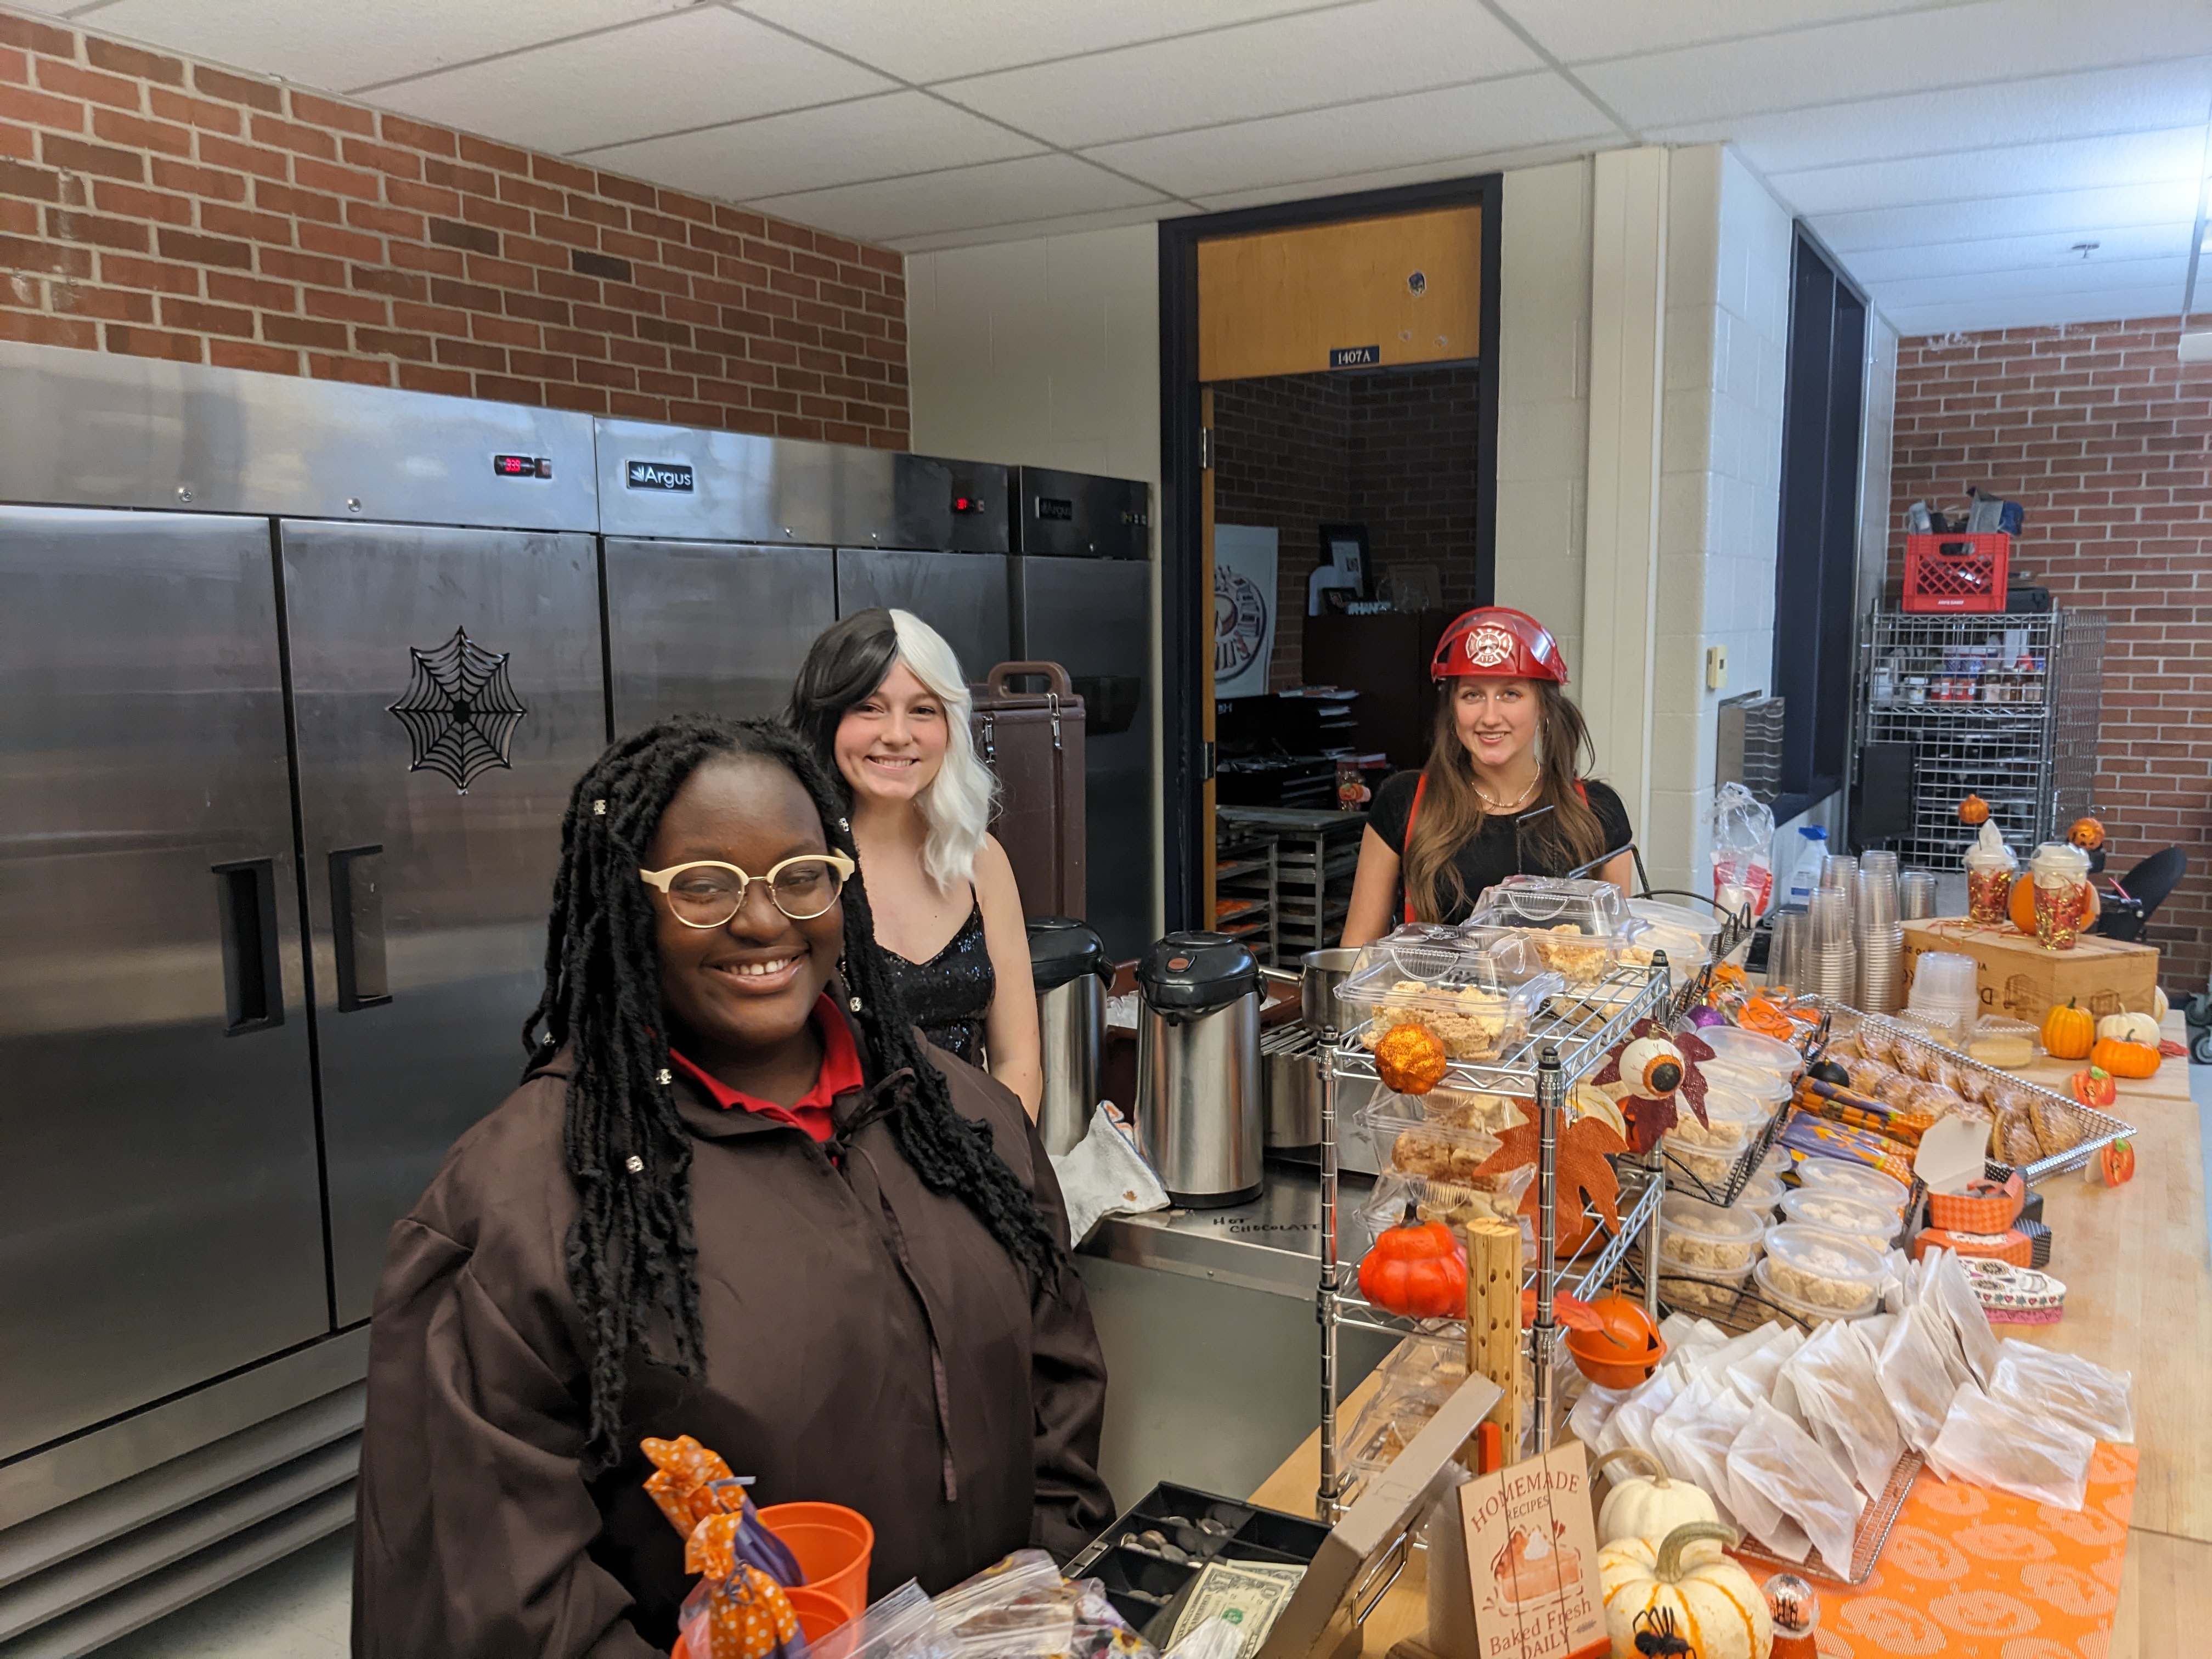 The culinary students are in costume and in the spirit while making tasty treats.